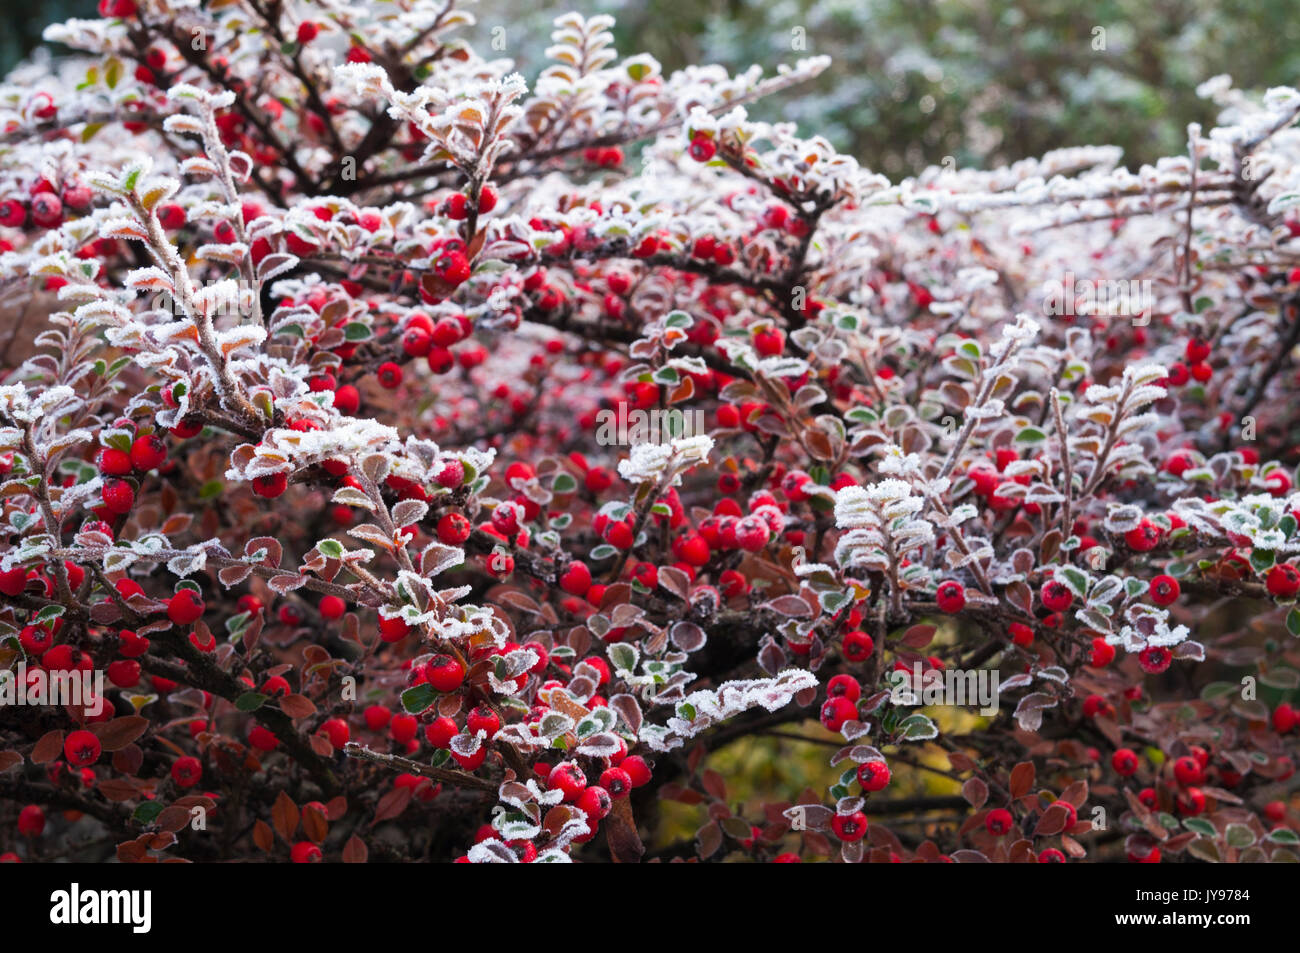 Bright red cotoneaster berries and delicate leaves coated in hoar frost on a cold December morning in a British garden. Stock Photo